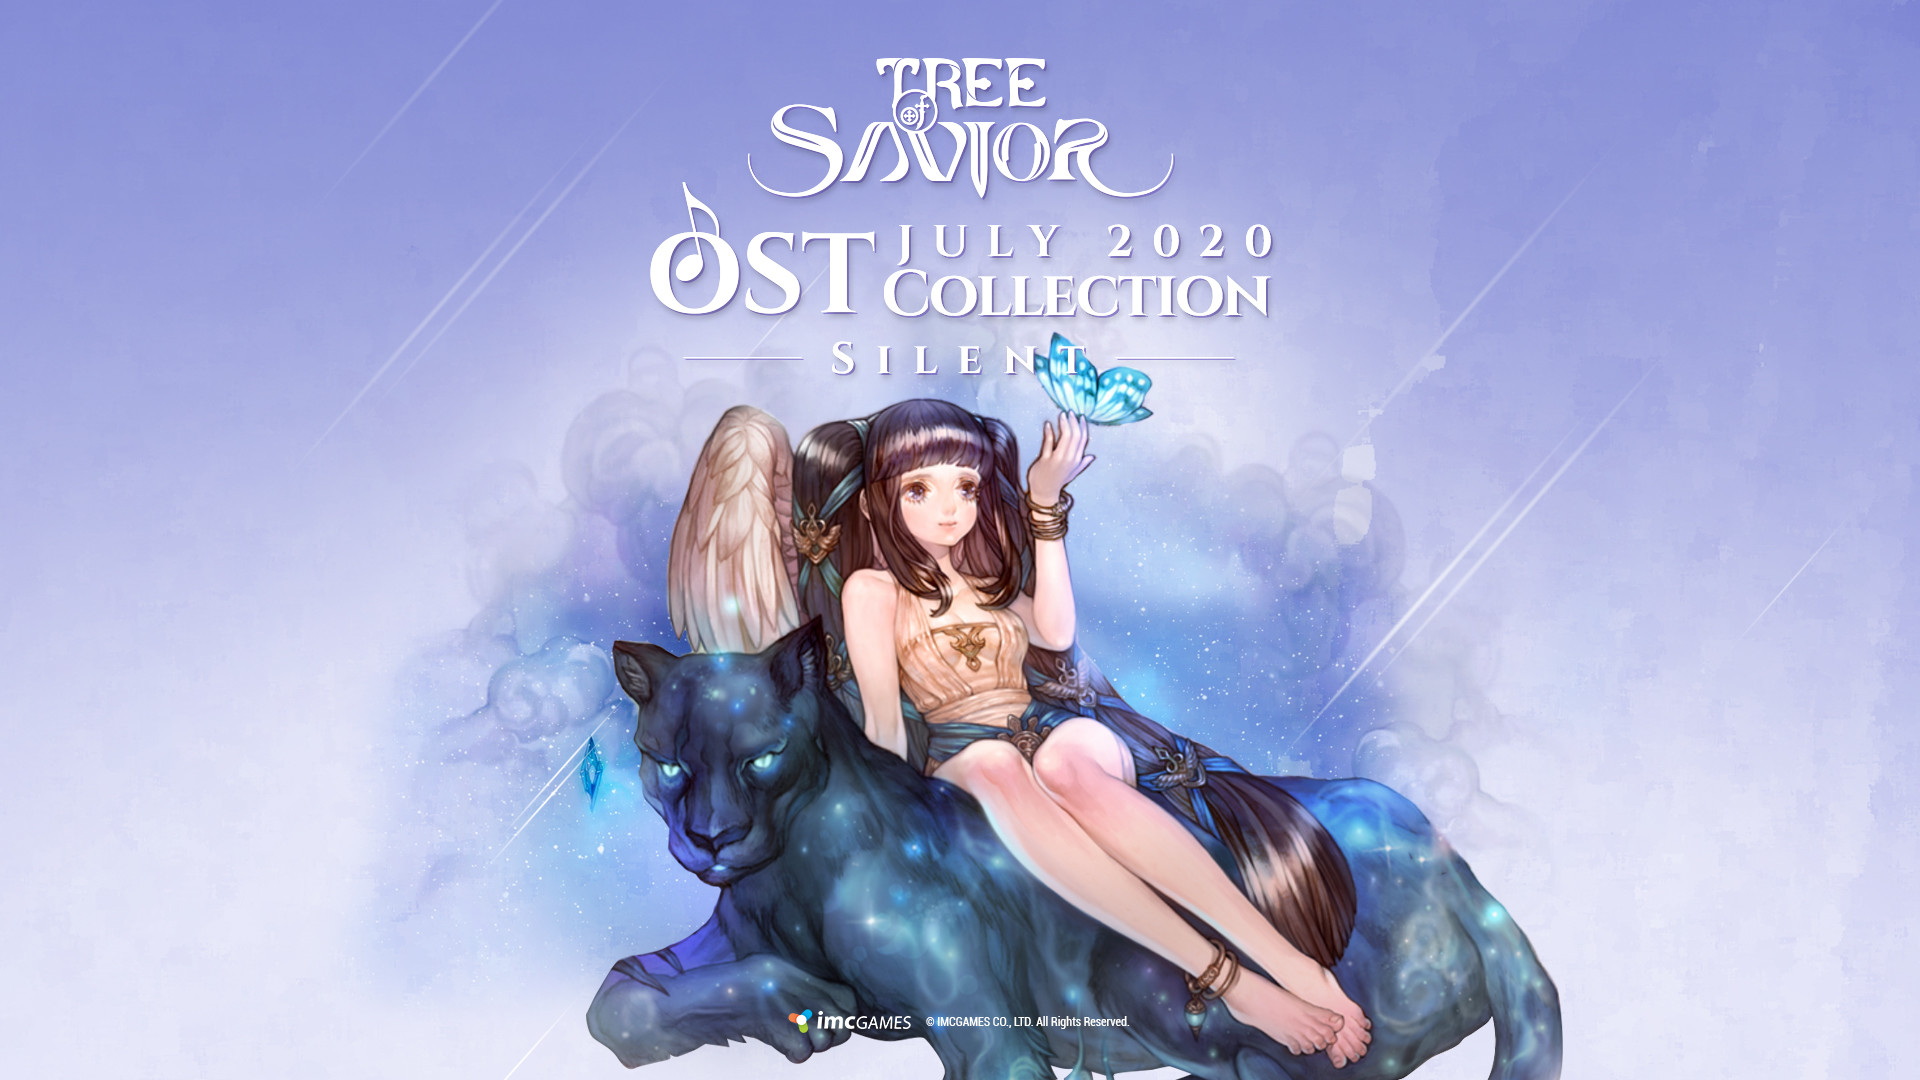 Tree of Savior - Silent JULY 2020 OST Collection Featured Screenshot #1